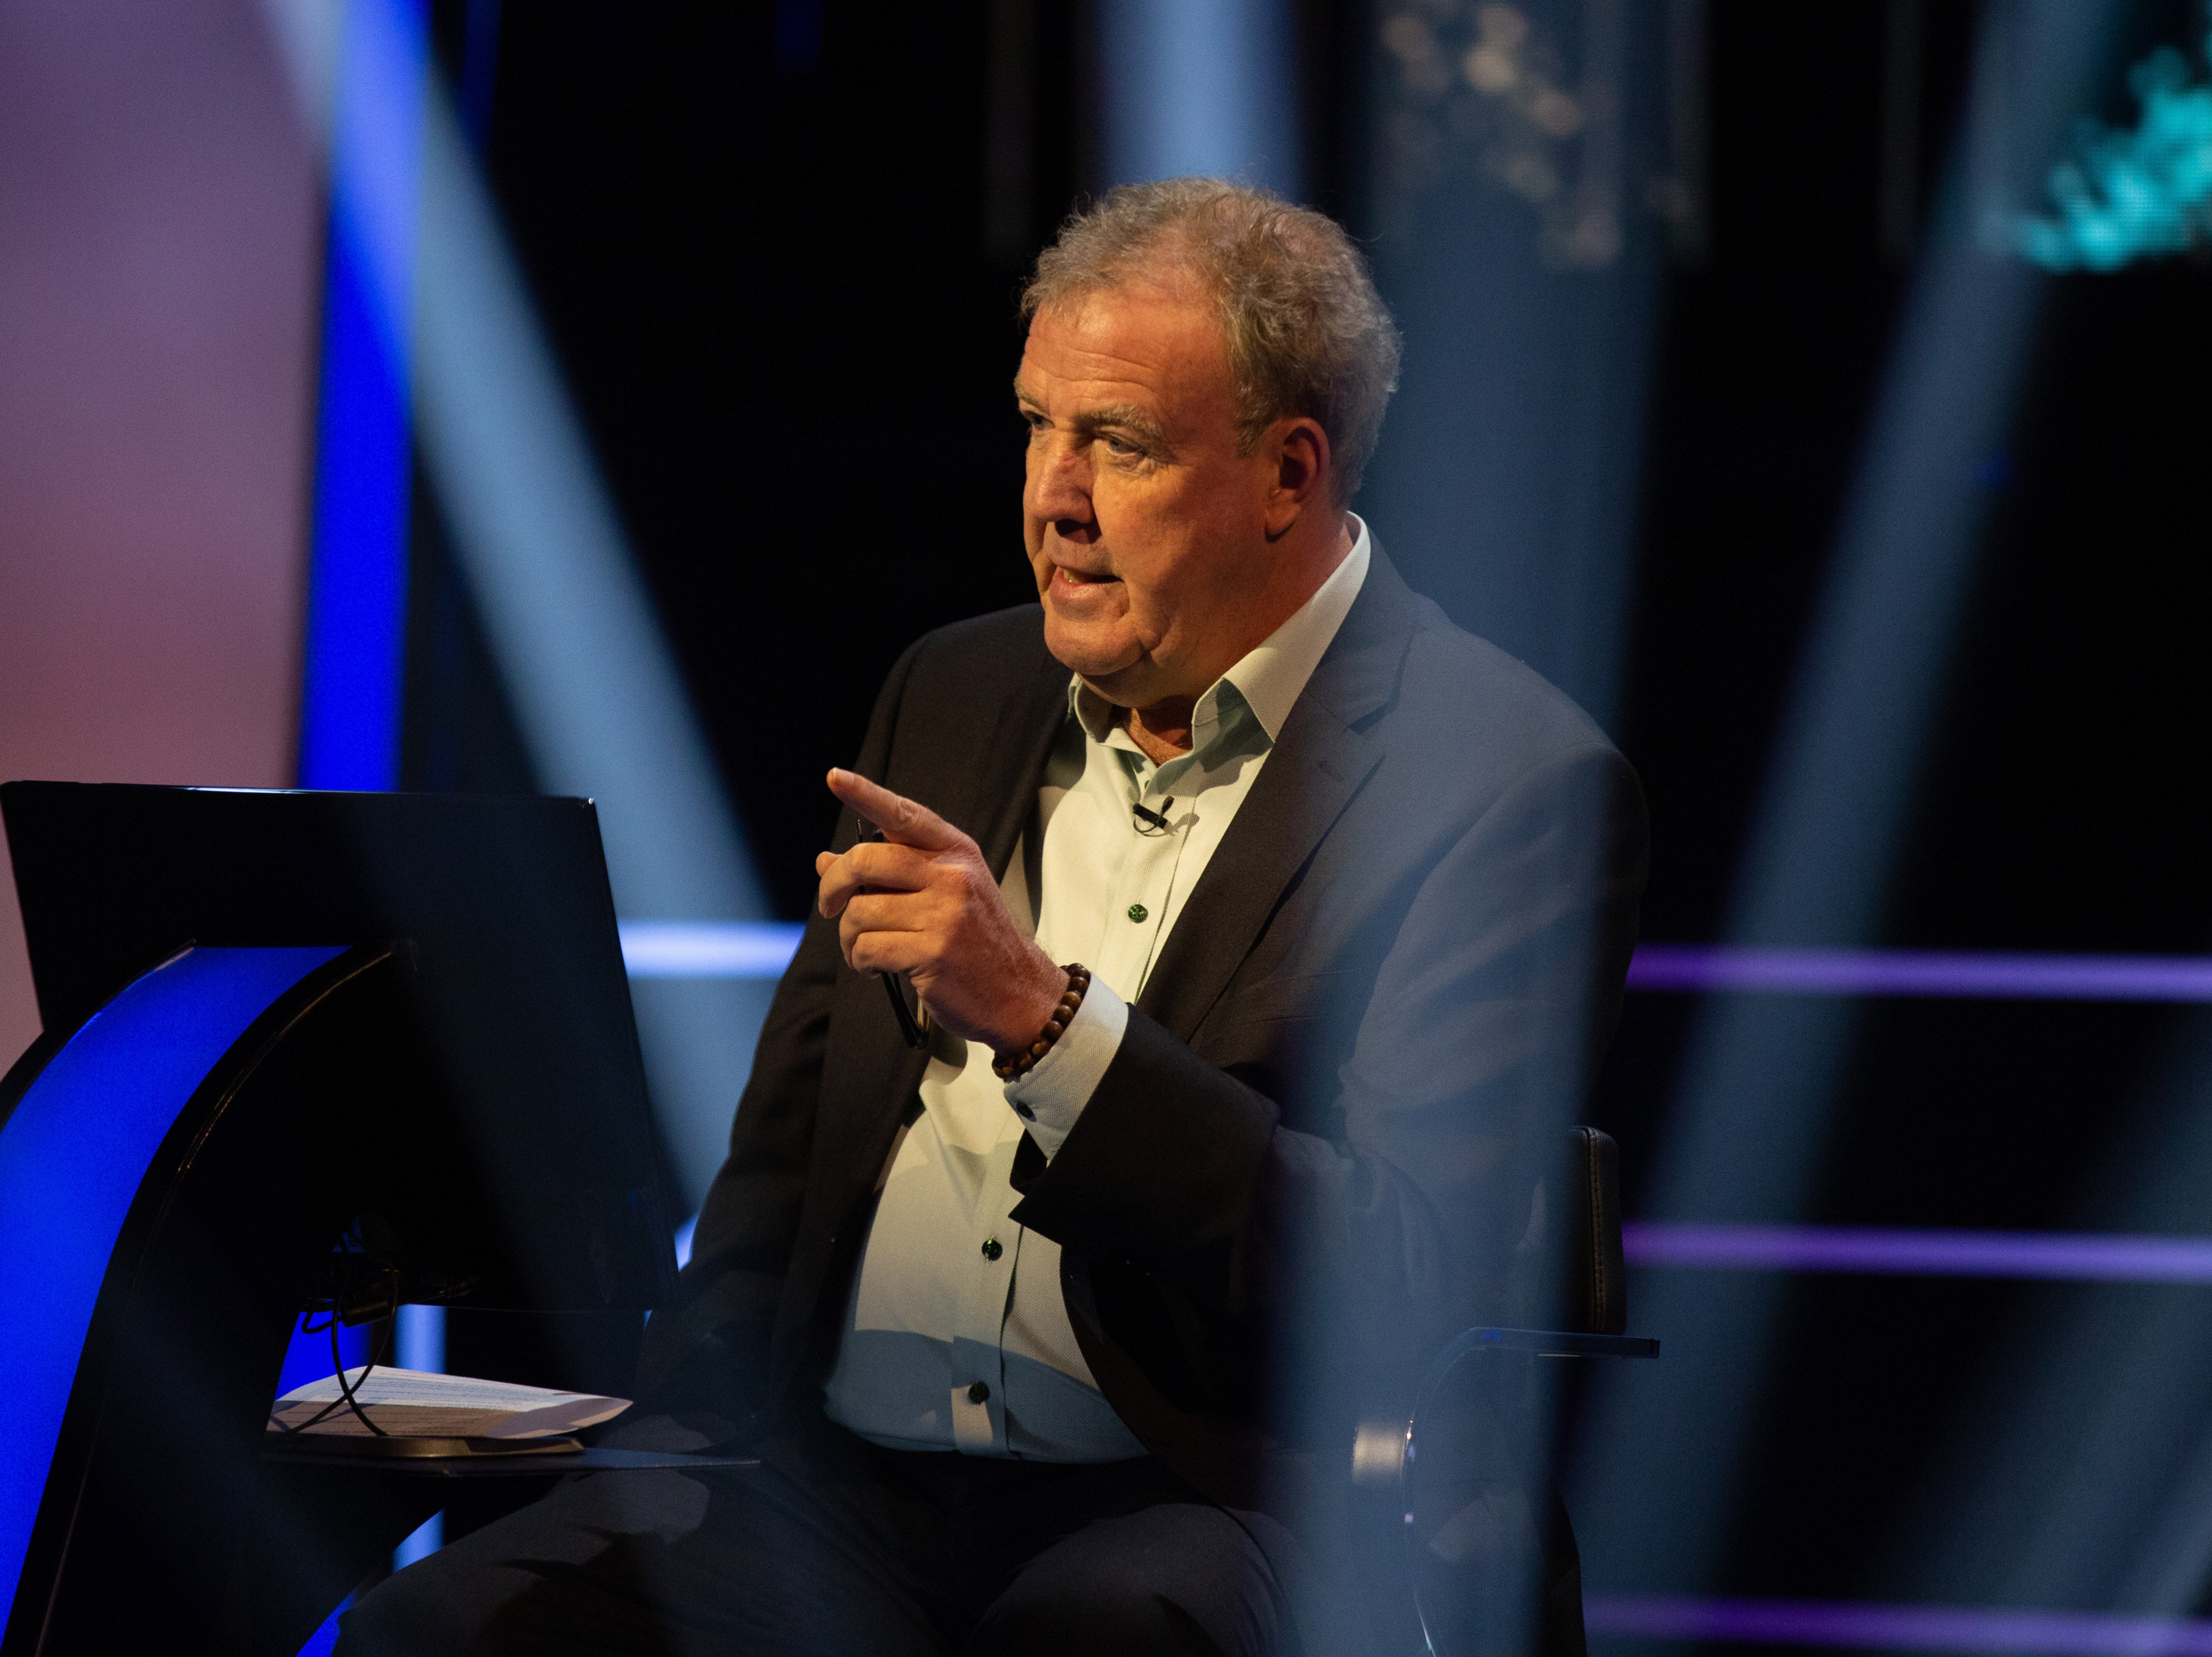 Clarkson has served as the host of ‘Who Wants to Be a Millionaire?’ since 2018